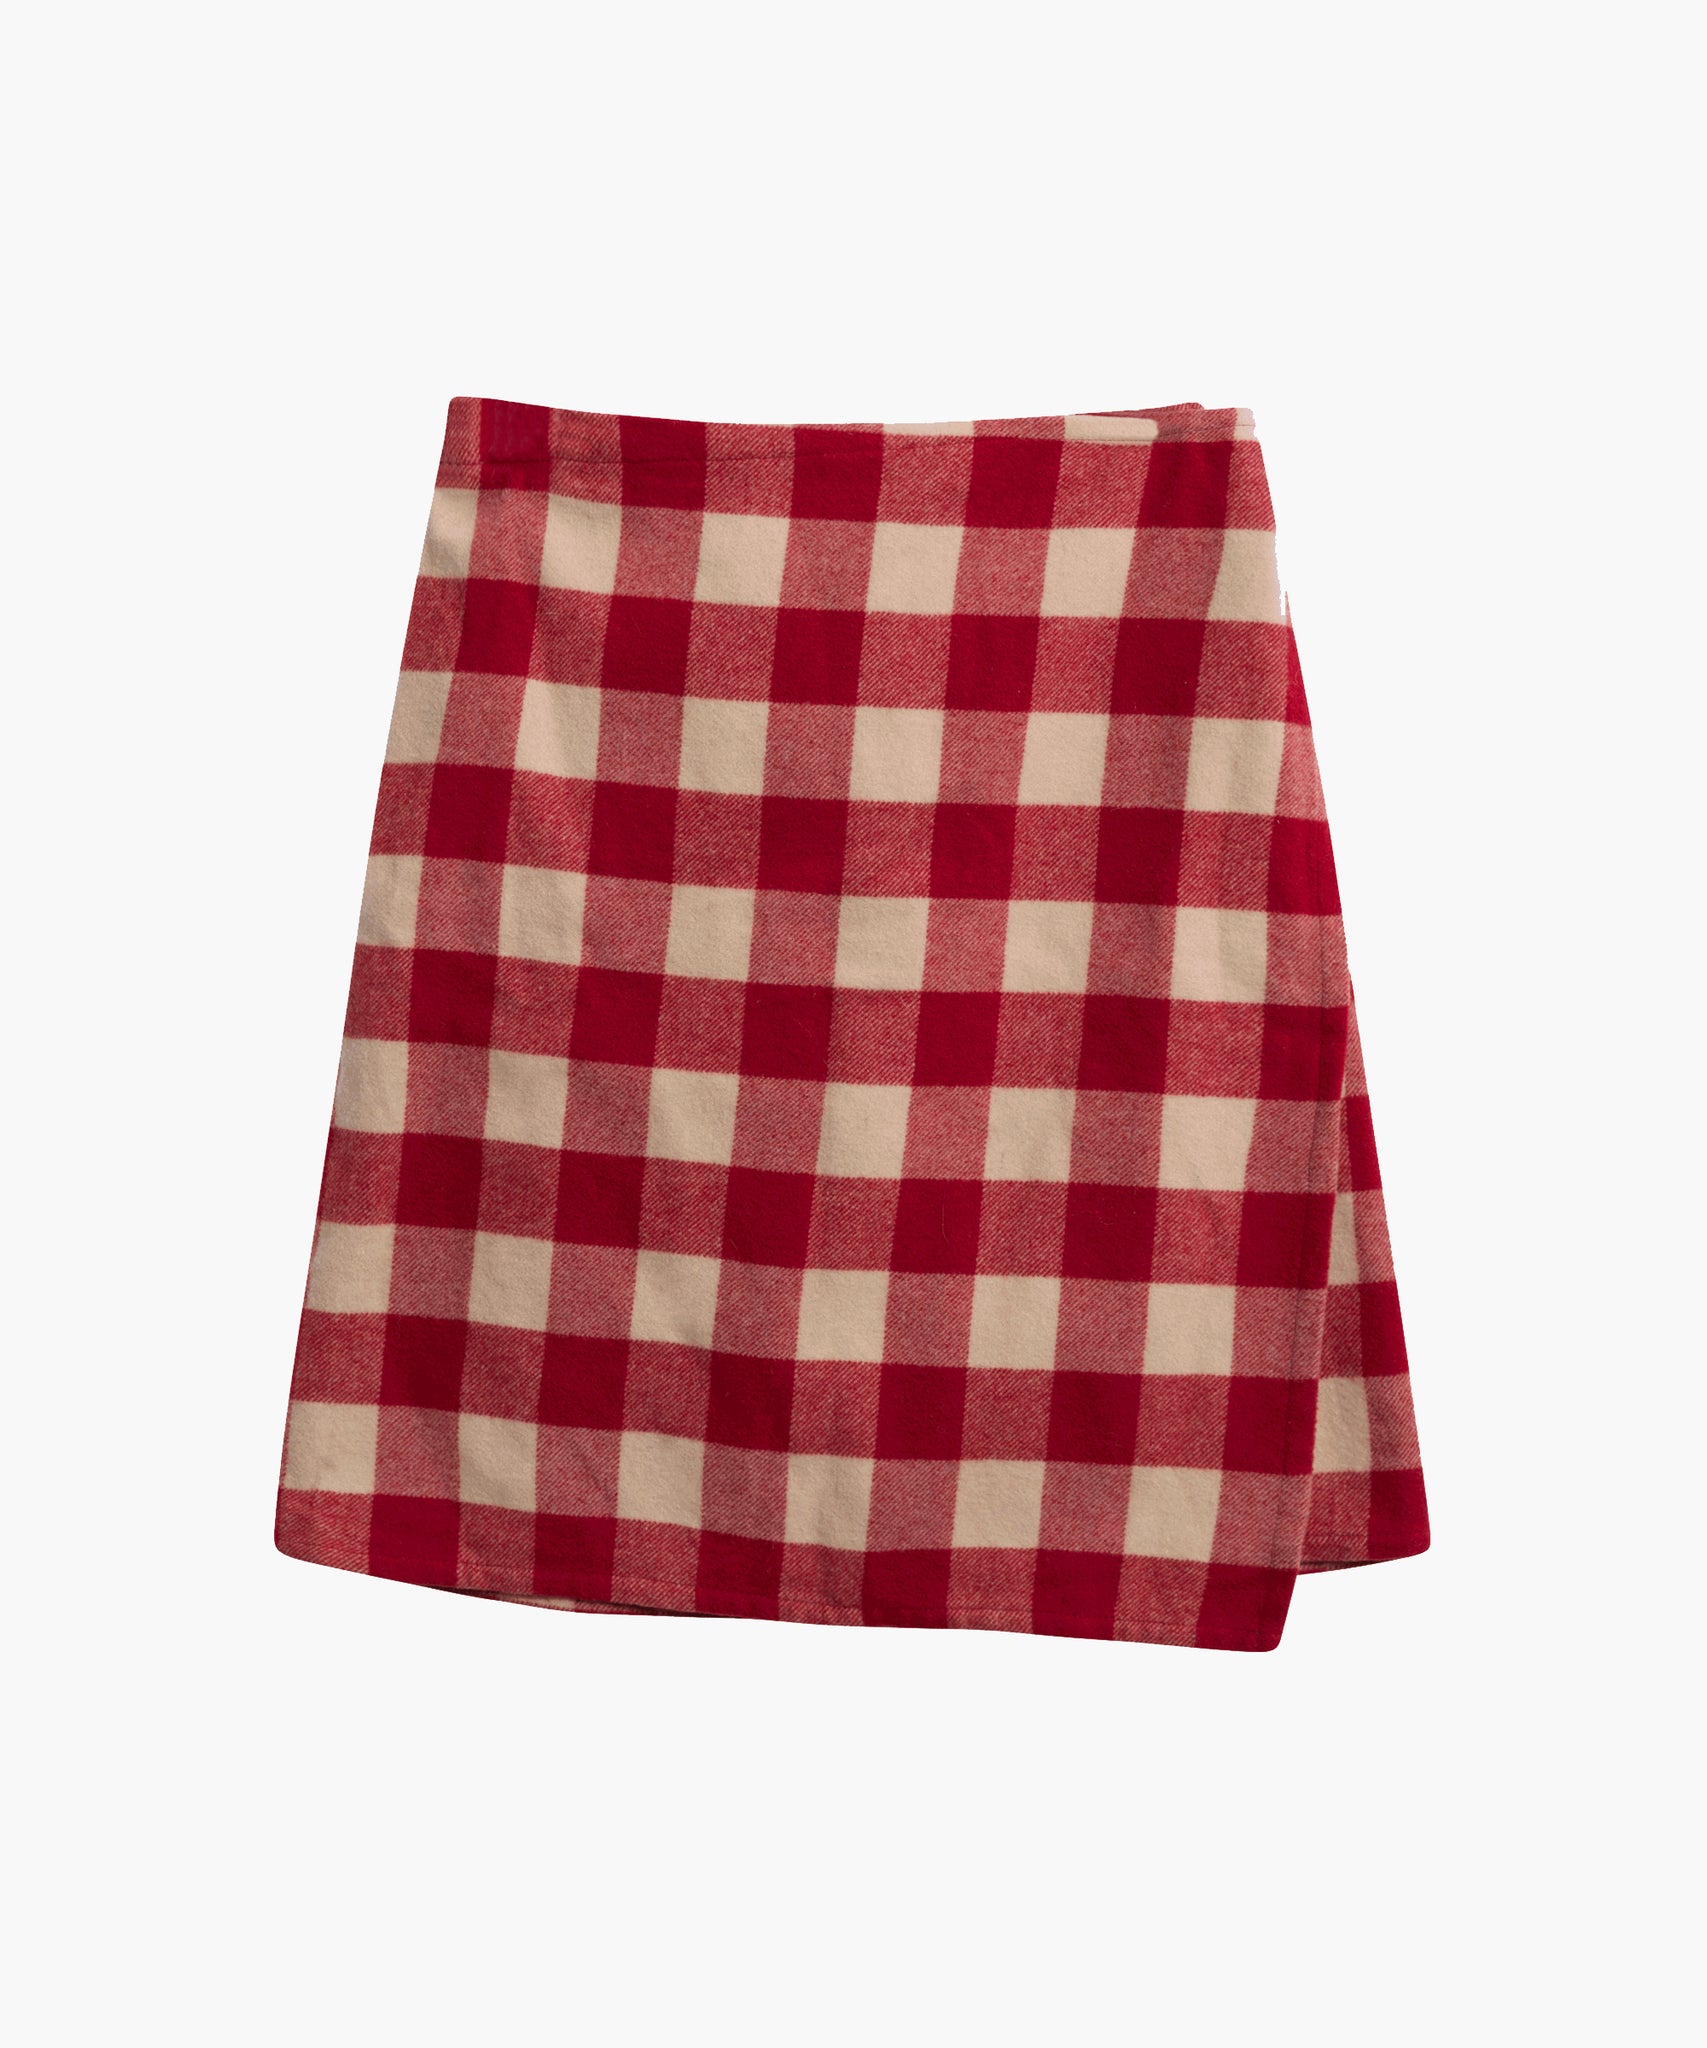 DKNY Red Checkered Blazer and Skirt - Red